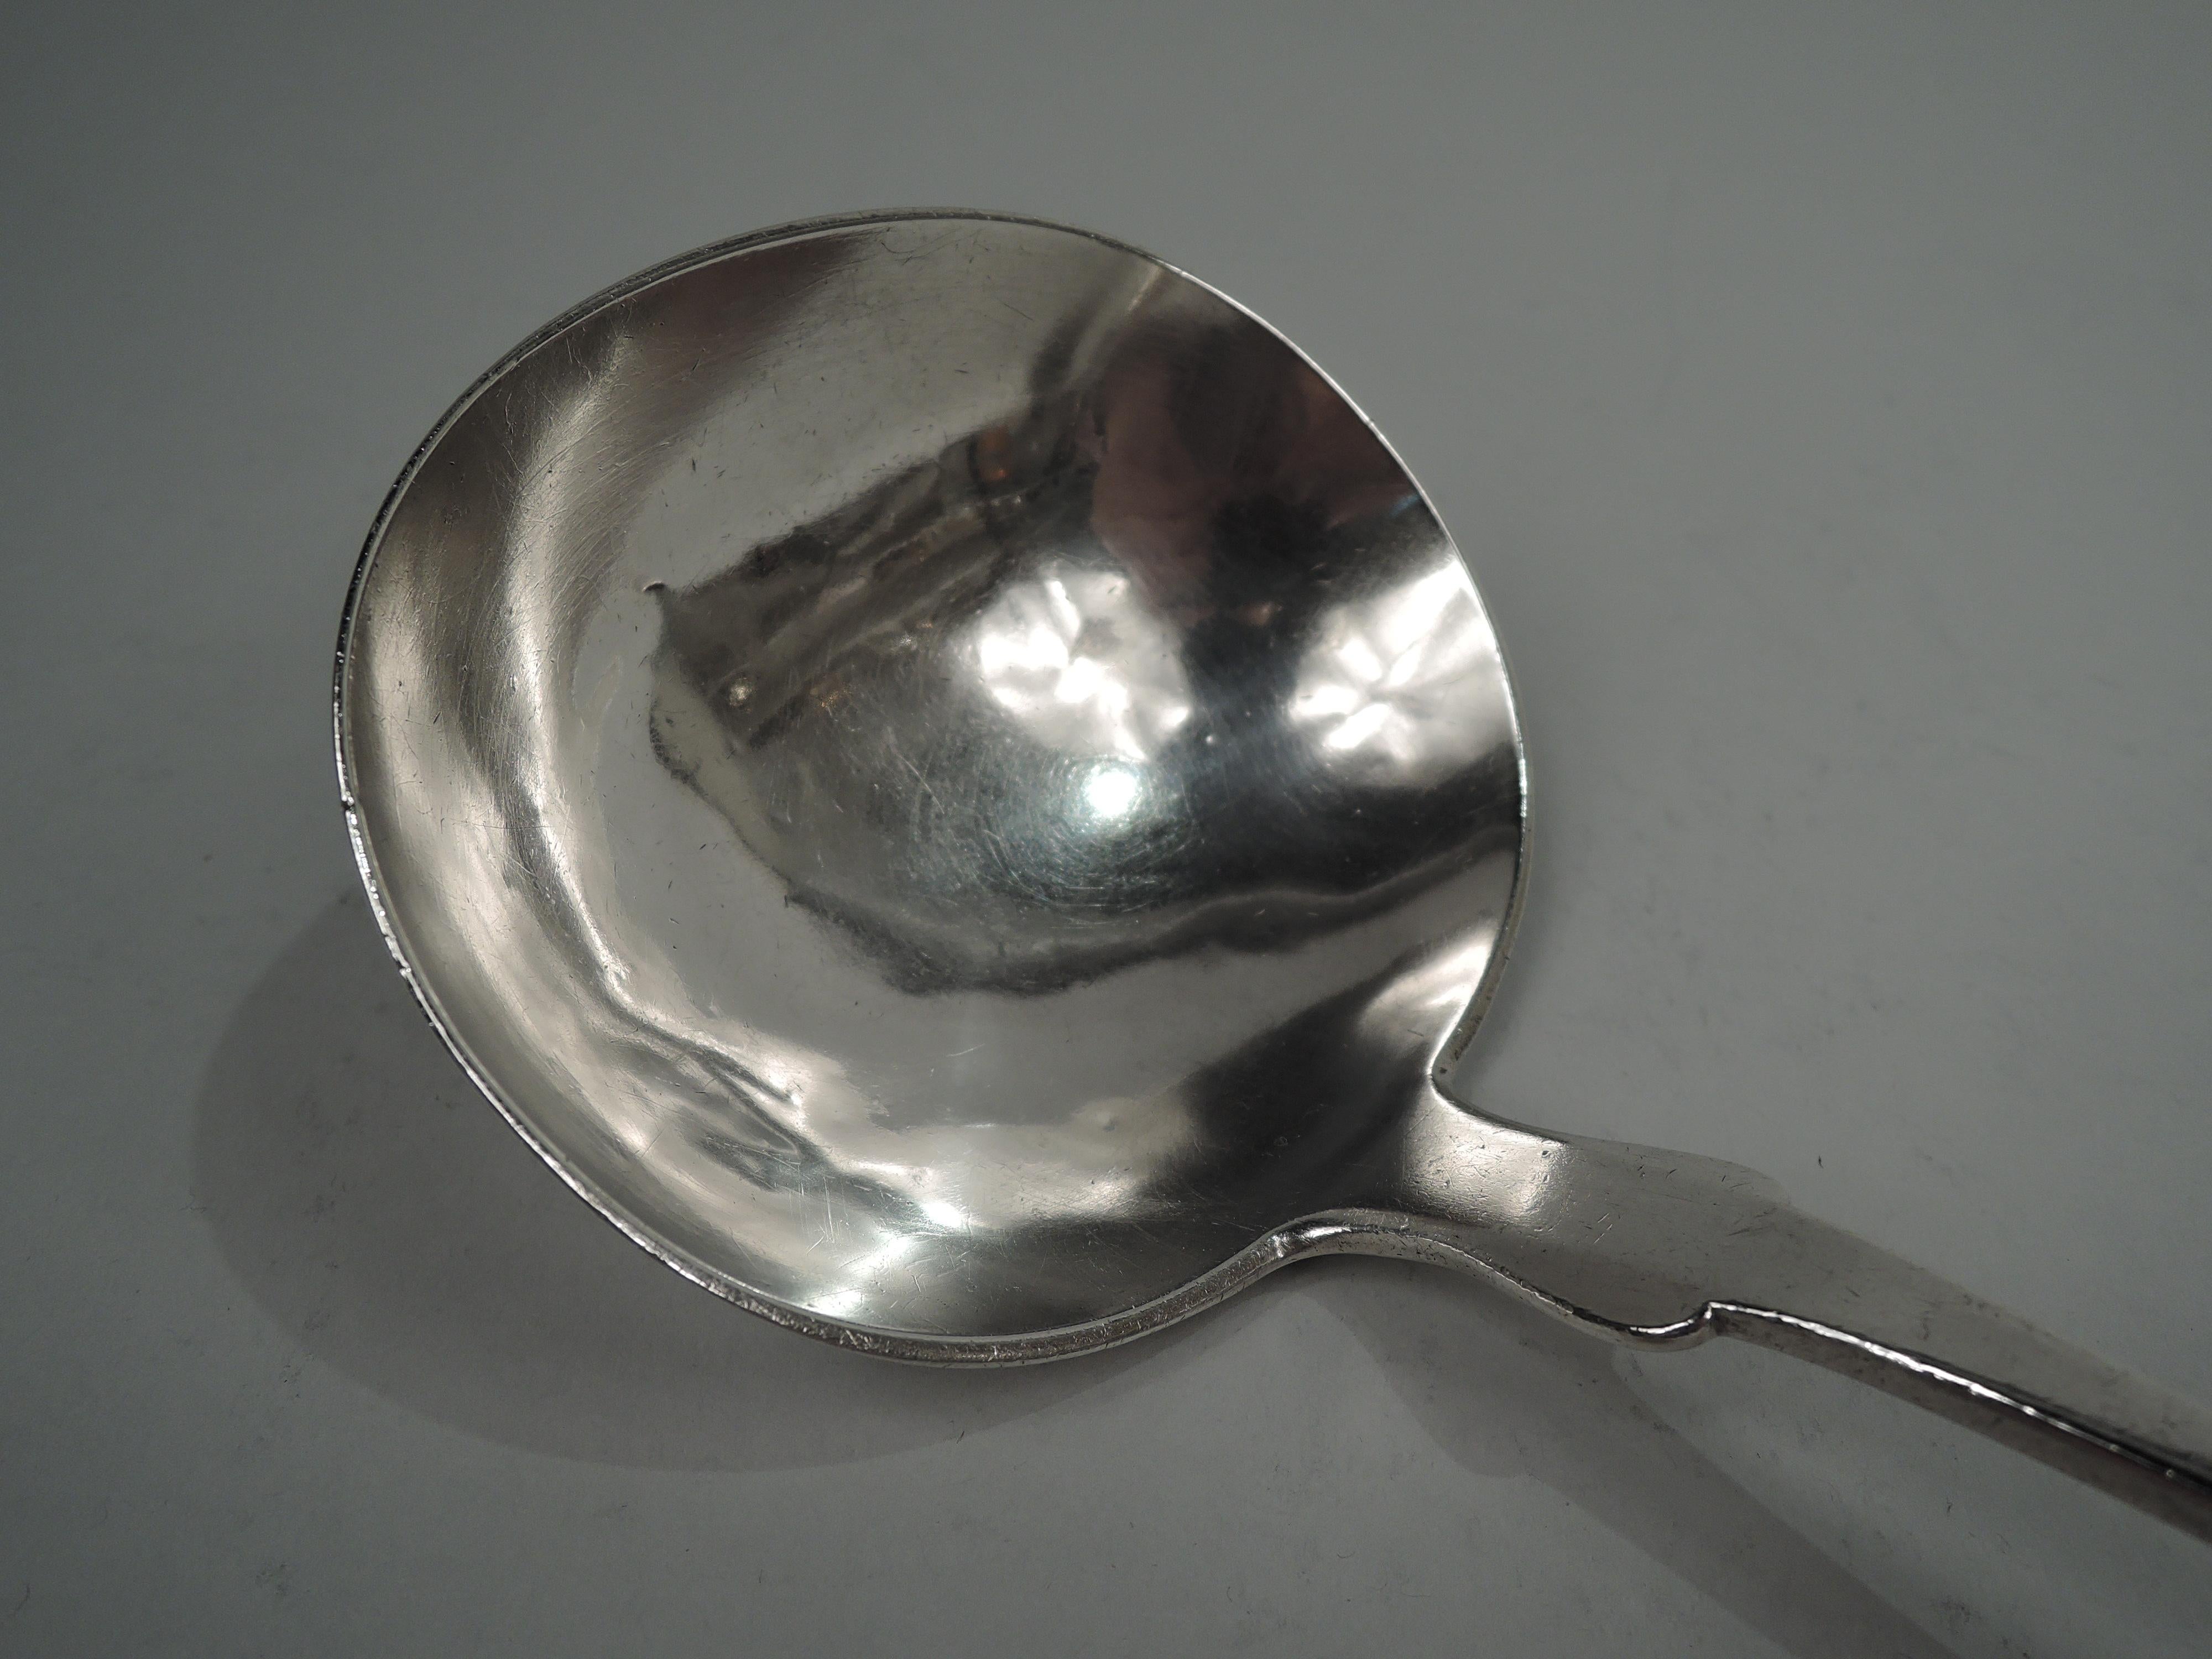 Federal Classical silver ladle. Made by Gould & Ward in Baltimore, ca 1820. Upturned fiddle terminal engraved with script monogram. Marked “Gould & Ward Baltimore” with “11-12”, which was the Baltimore alloy. Gould & Ward succeeded Gelston & Gould